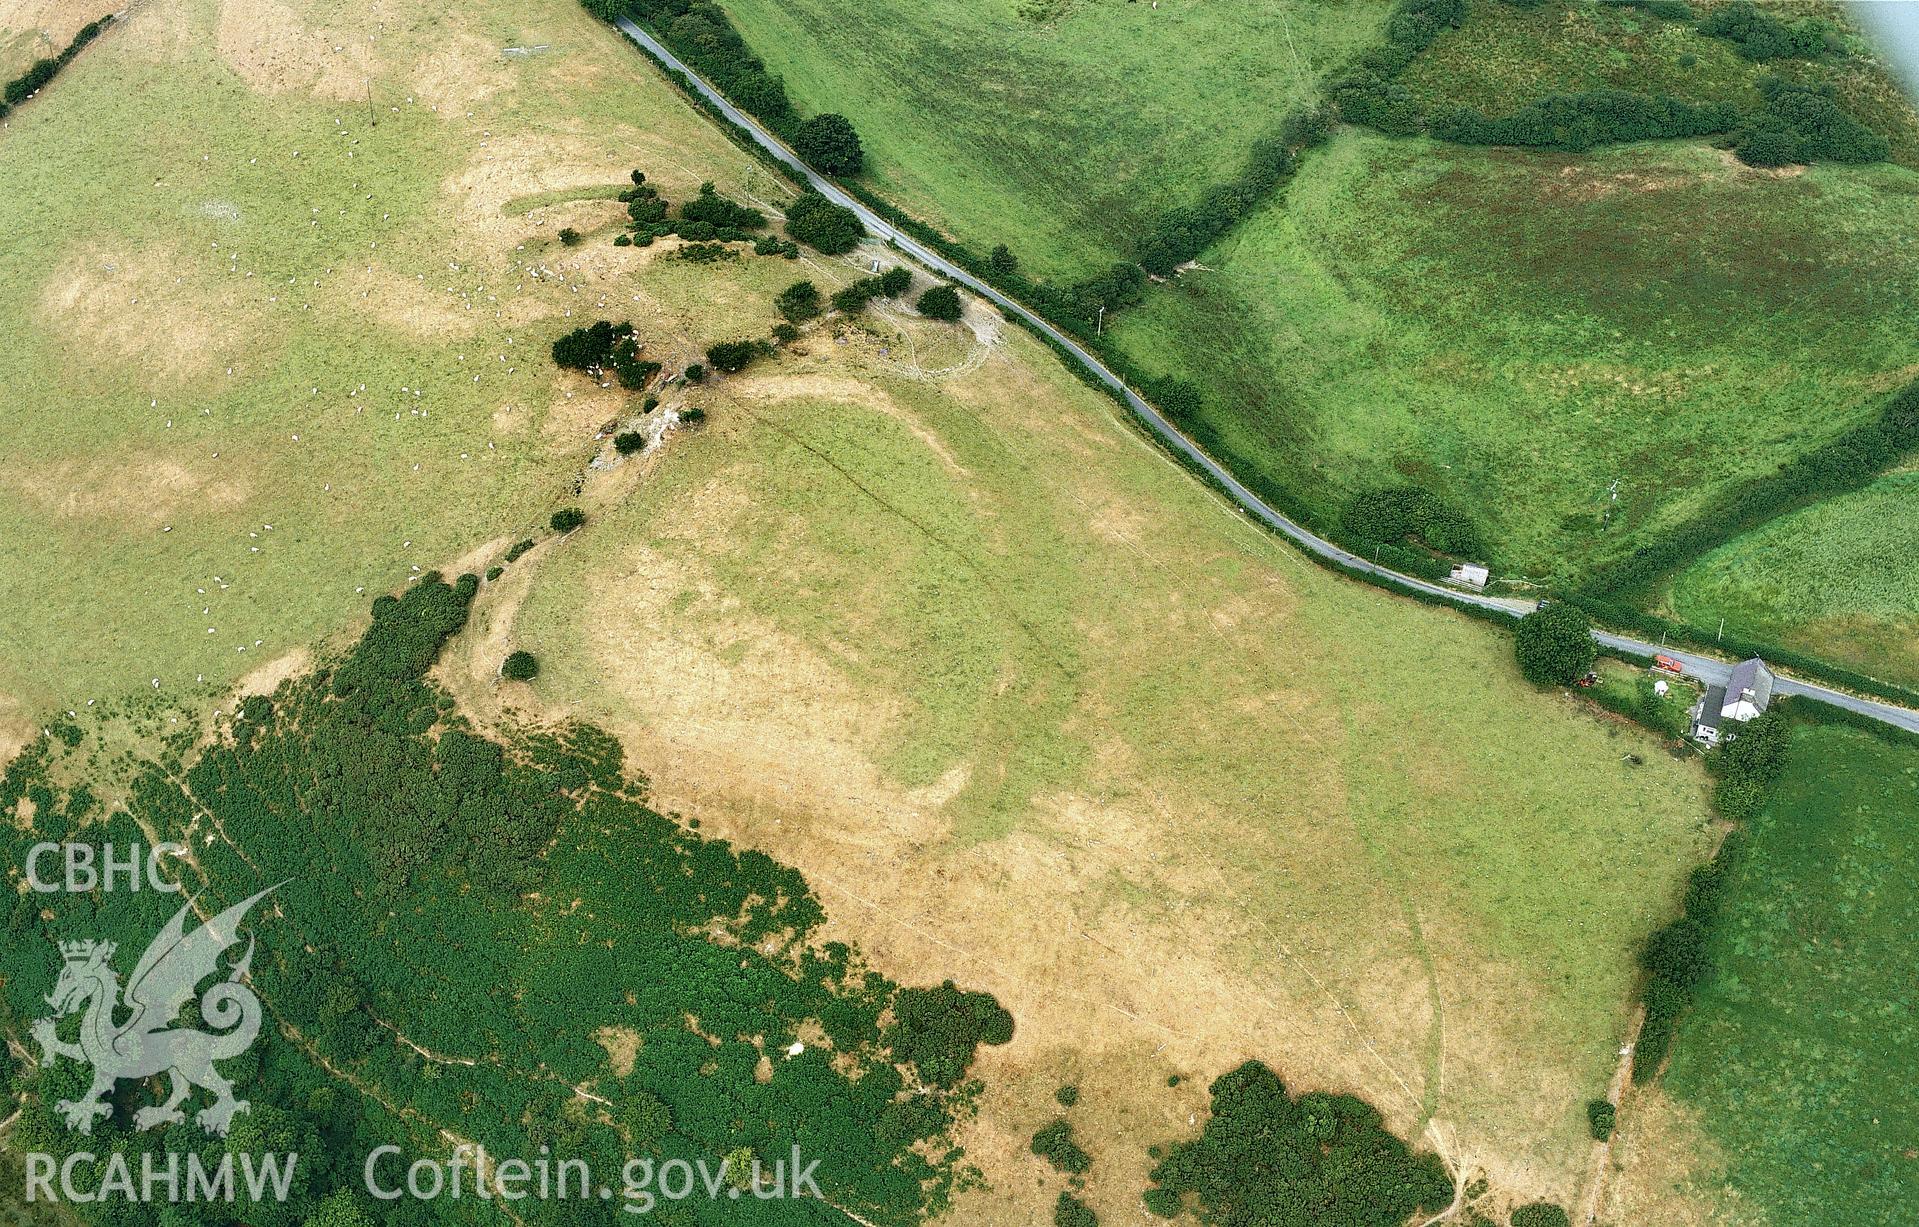 RCAHMW colour slide oblique aerial photograph of Caer Argoed, Llangwyryfon, taken on 02/08/1999 by Toby Driver